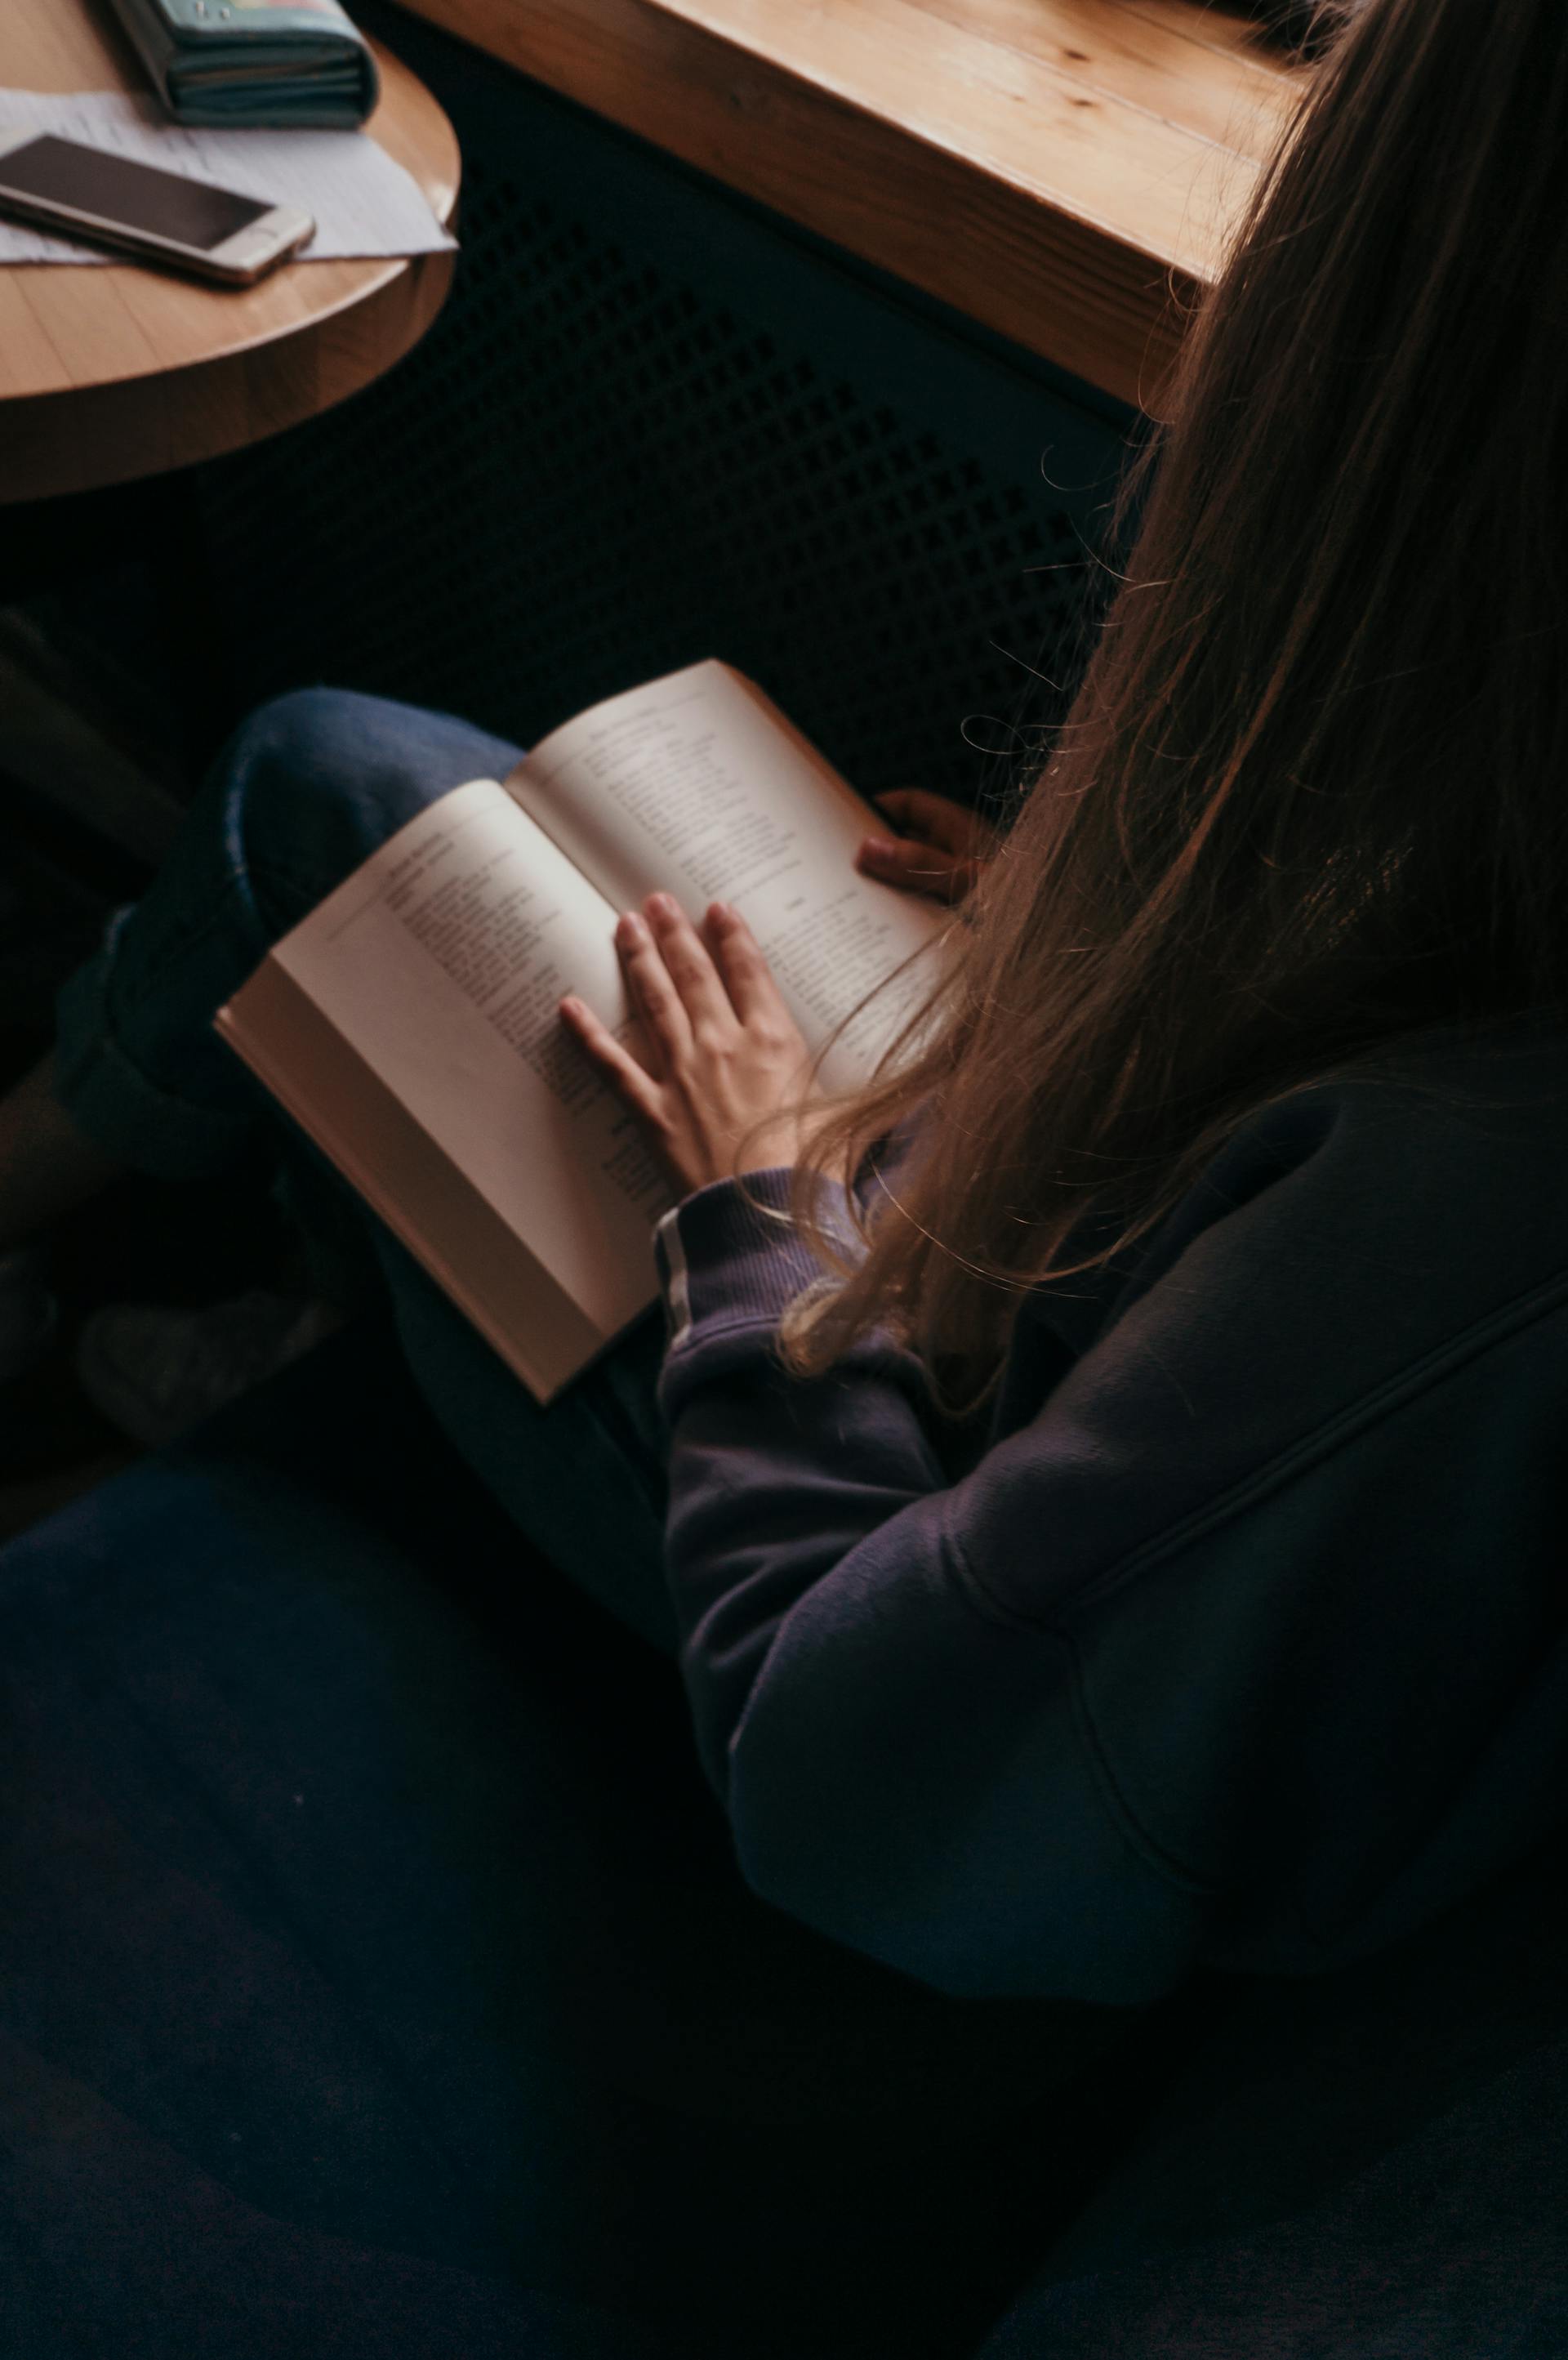 A person reading a book | Source: Pexels